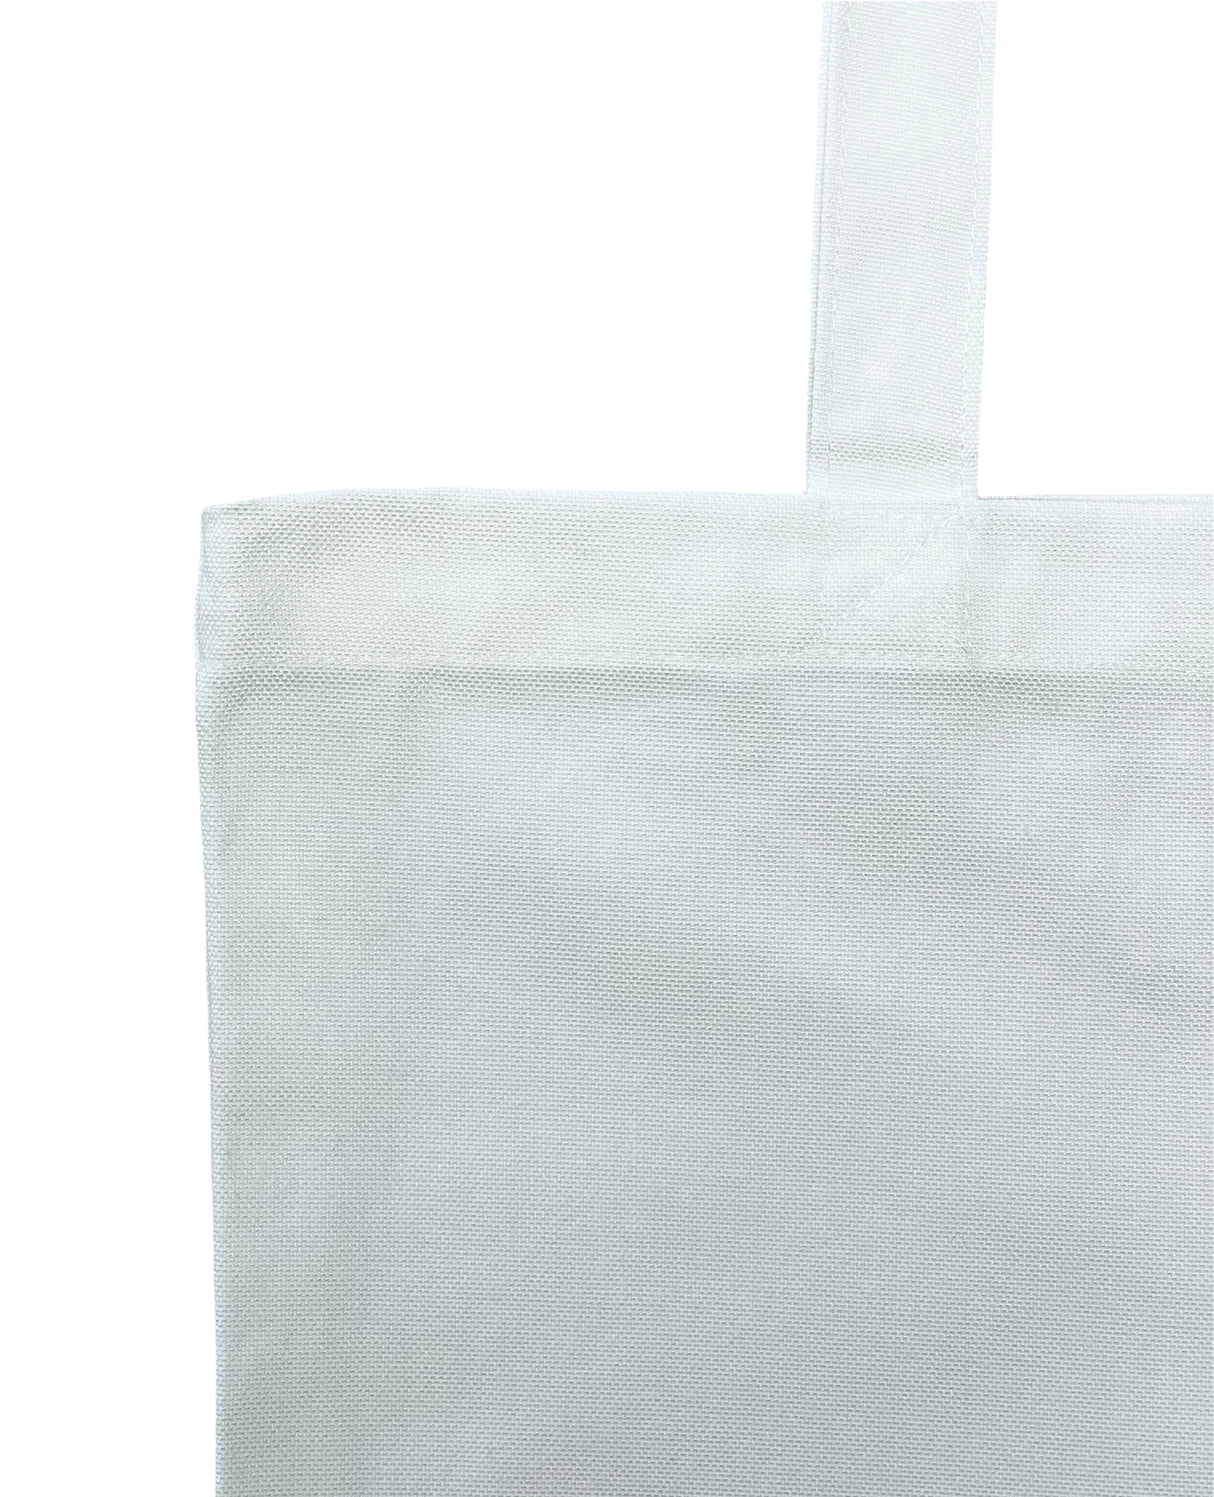 144 ct Sublimation 100% Polyester Canvas Tote Bags White - By Case